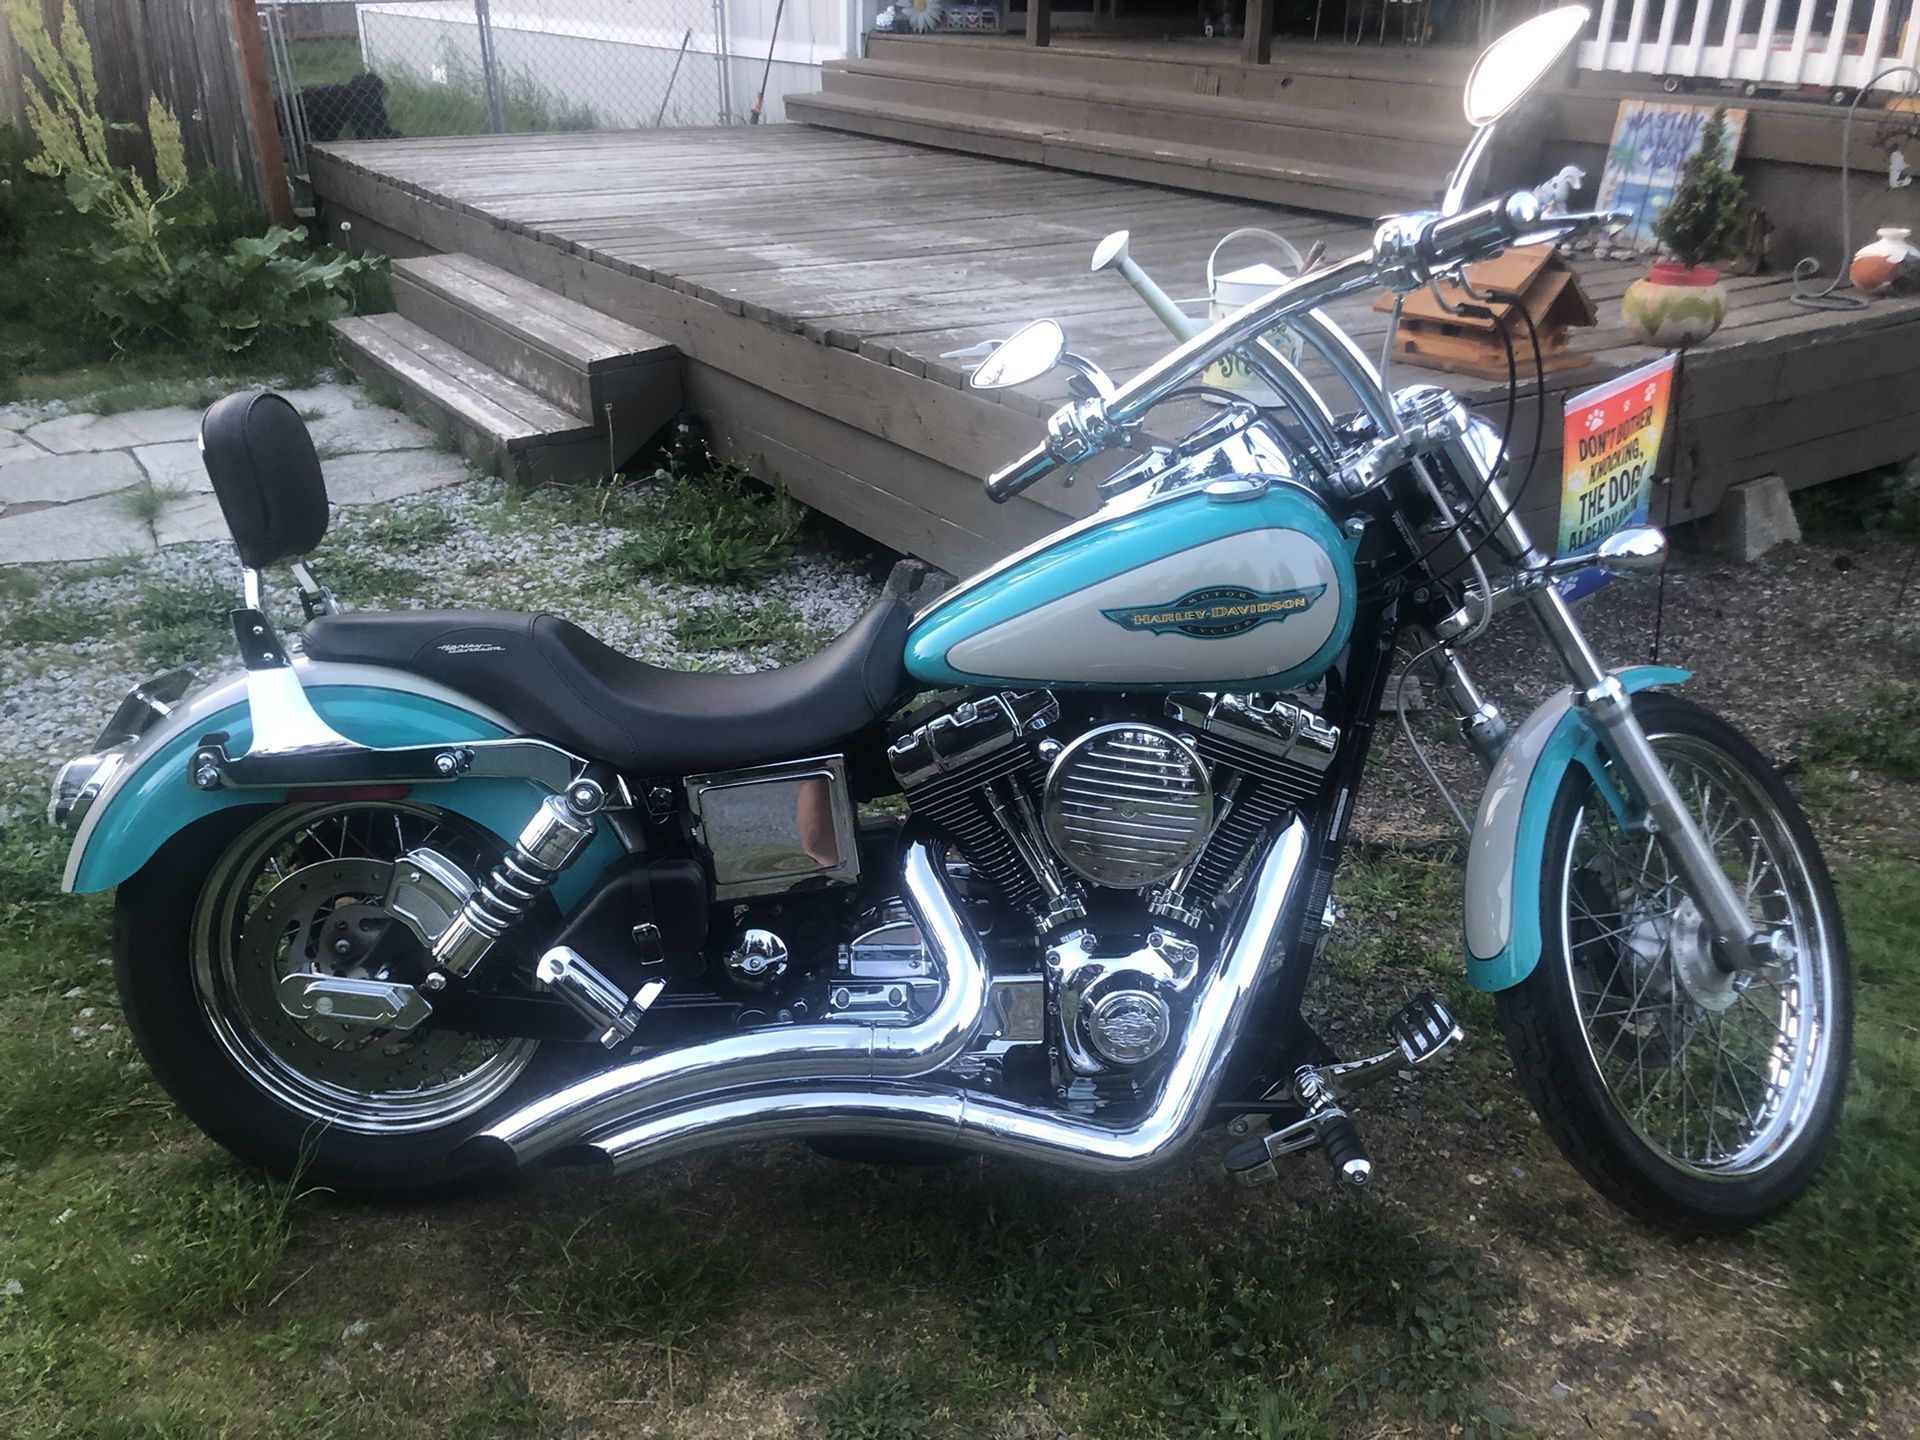 2005 Harley Dyna Lowrider Excellent Condition 18,000 Miles